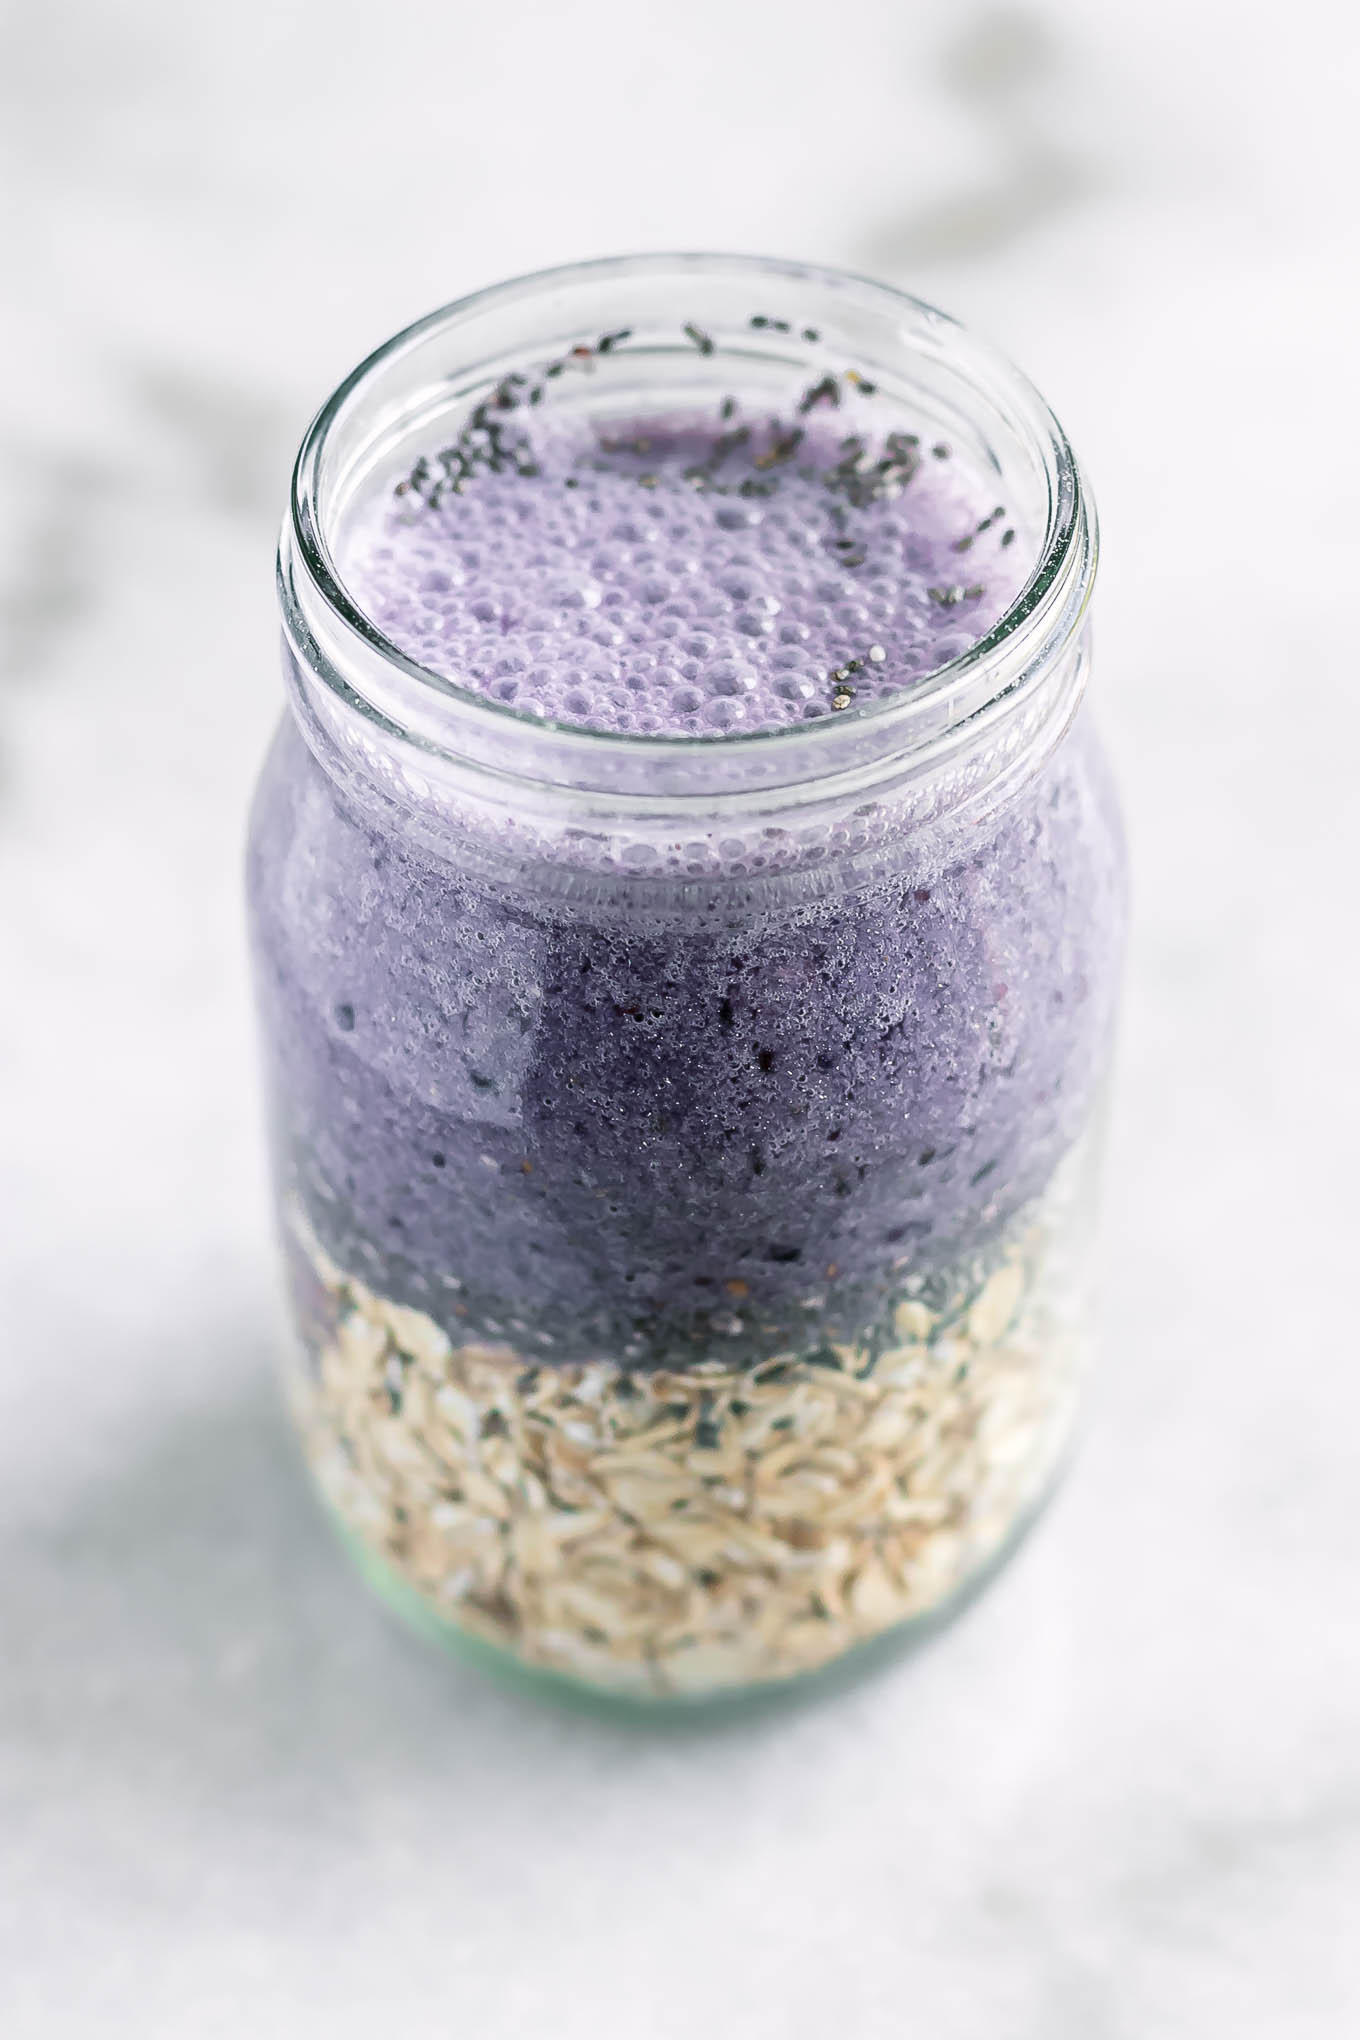 rolled oats and blackberry-flavored milk inside a mason jar on a white table